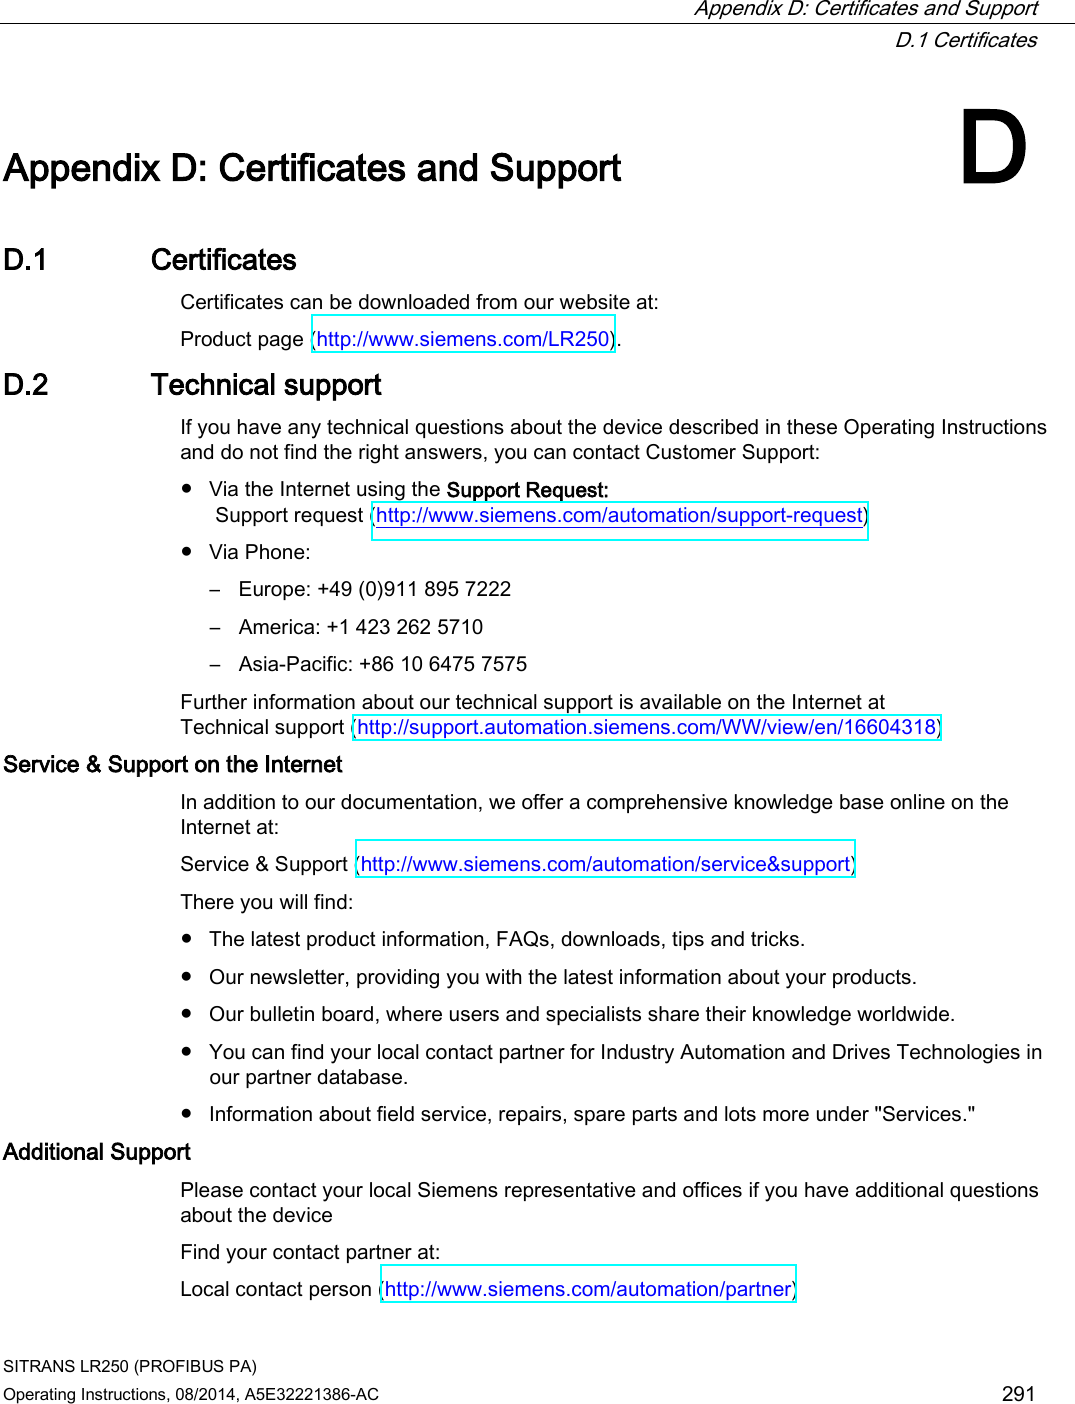  Appendix D: Certificates and Support  D.1 Certificates SITRANS LR250 (PROFIBUS PA) Operating Instructions, 08/2014, A5E32221386-AC 291  Appendix D: Certificates and Support D D.1 Certificates Certificates can be downloaded from our website at:  Product page (http://www.siemens.com/LR250). D.2 Technical support If you have any technical questions about the device described in these Operating Instructions and do not find the right answers, you can contact Customer Support:  ● Via the Internet using the Support Request:   Support request (http://www.siemens.com/automation/support-request)  ● Via Phone: – Europe: +49 (0)911 895 7222 – America: +1 423 262 5710 – Asia-Pacific: +86 10 6475 7575 Further information about our technical support is available on the Internet at  Technical support (http://support.automation.siemens.com/WW/view/en/16604318) Service &amp; Support on the Internet  In addition to our documentation, we offer a comprehensive knowledge base online on the Internet at:  Service &amp; Support (http://www.siemens.com/automation/service&amp;support)  There you will find: ● The latest product information, FAQs, downloads, tips and tricks. ● Our newsletter, providing you with the latest information about your products. ● Our bulletin board, where users and specialists share their knowledge worldwide. ● You can find your local contact partner for Industry Automation and Drives Technologies in our partner database. ● Information about field service, repairs, spare parts and lots more under &quot;Services.&quot; Additional Support  Please contact your local Siemens representative and offices if you have additional questions about the device Find your contact partner at: Local contact person (http://www.siemens.com/automation/partner)  